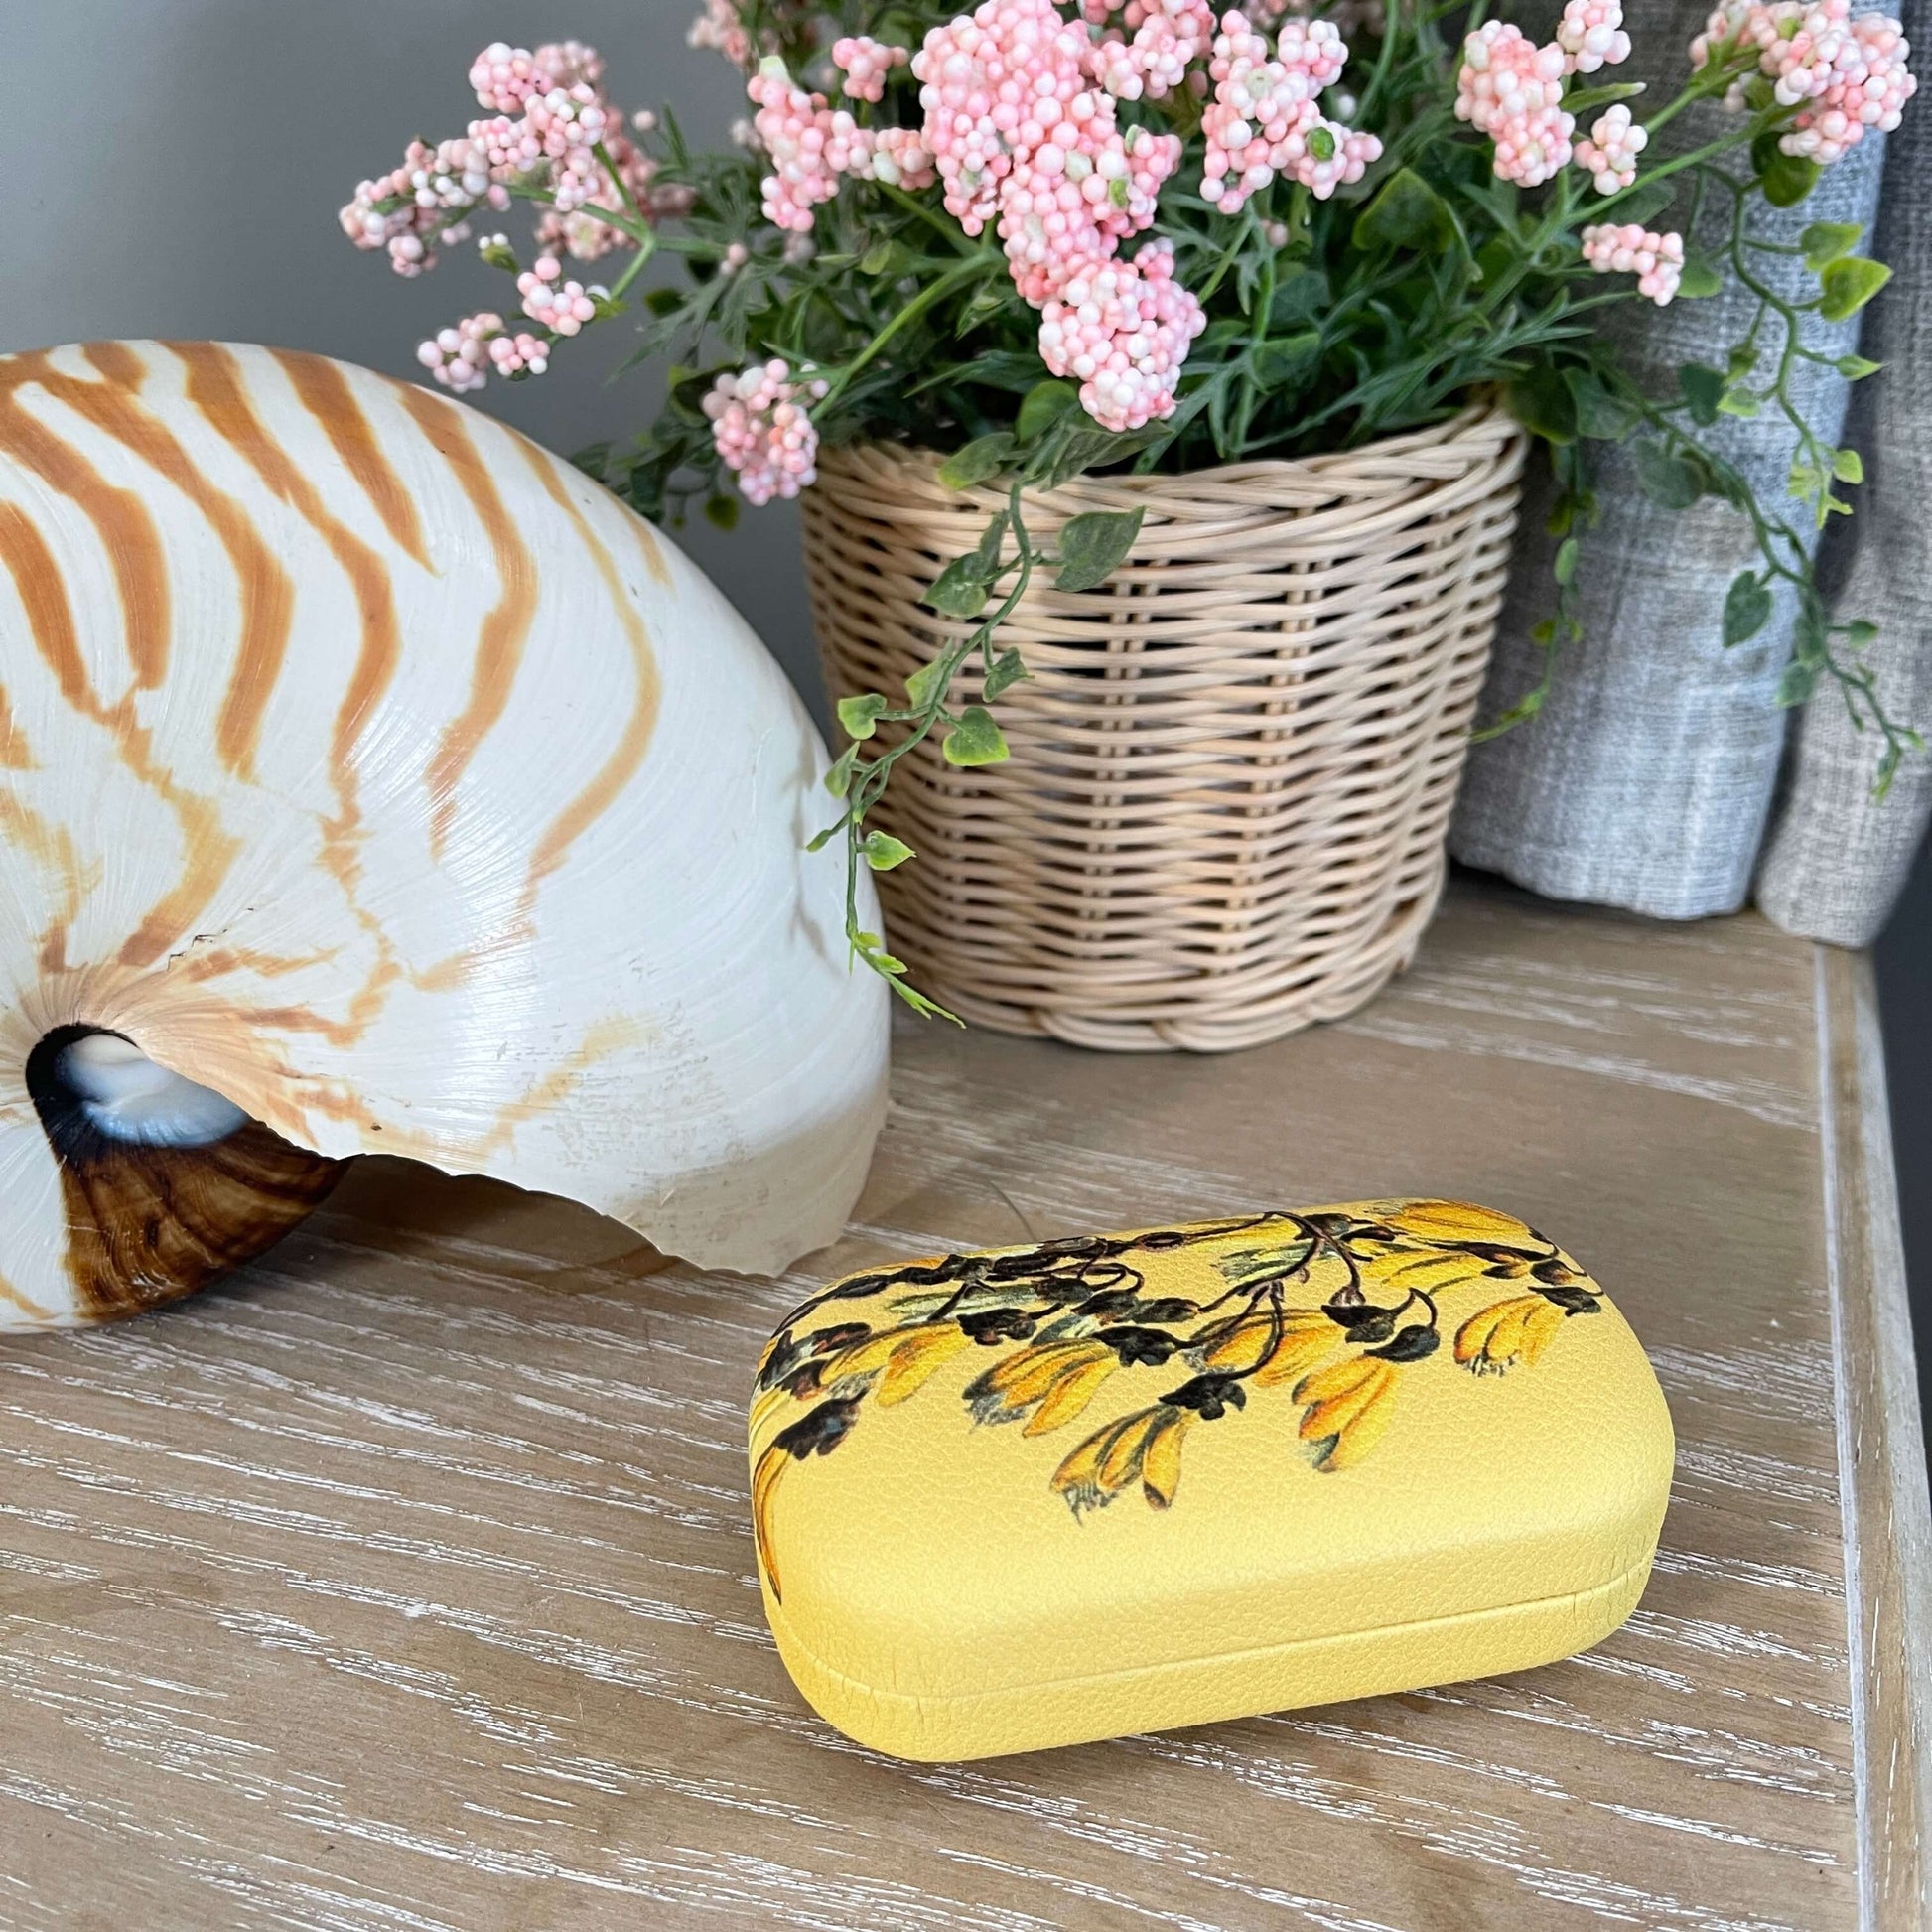 Small trinket case in bright yellow with Kowhai flowers on it sitting on a table with a large shell and faux pot plant.